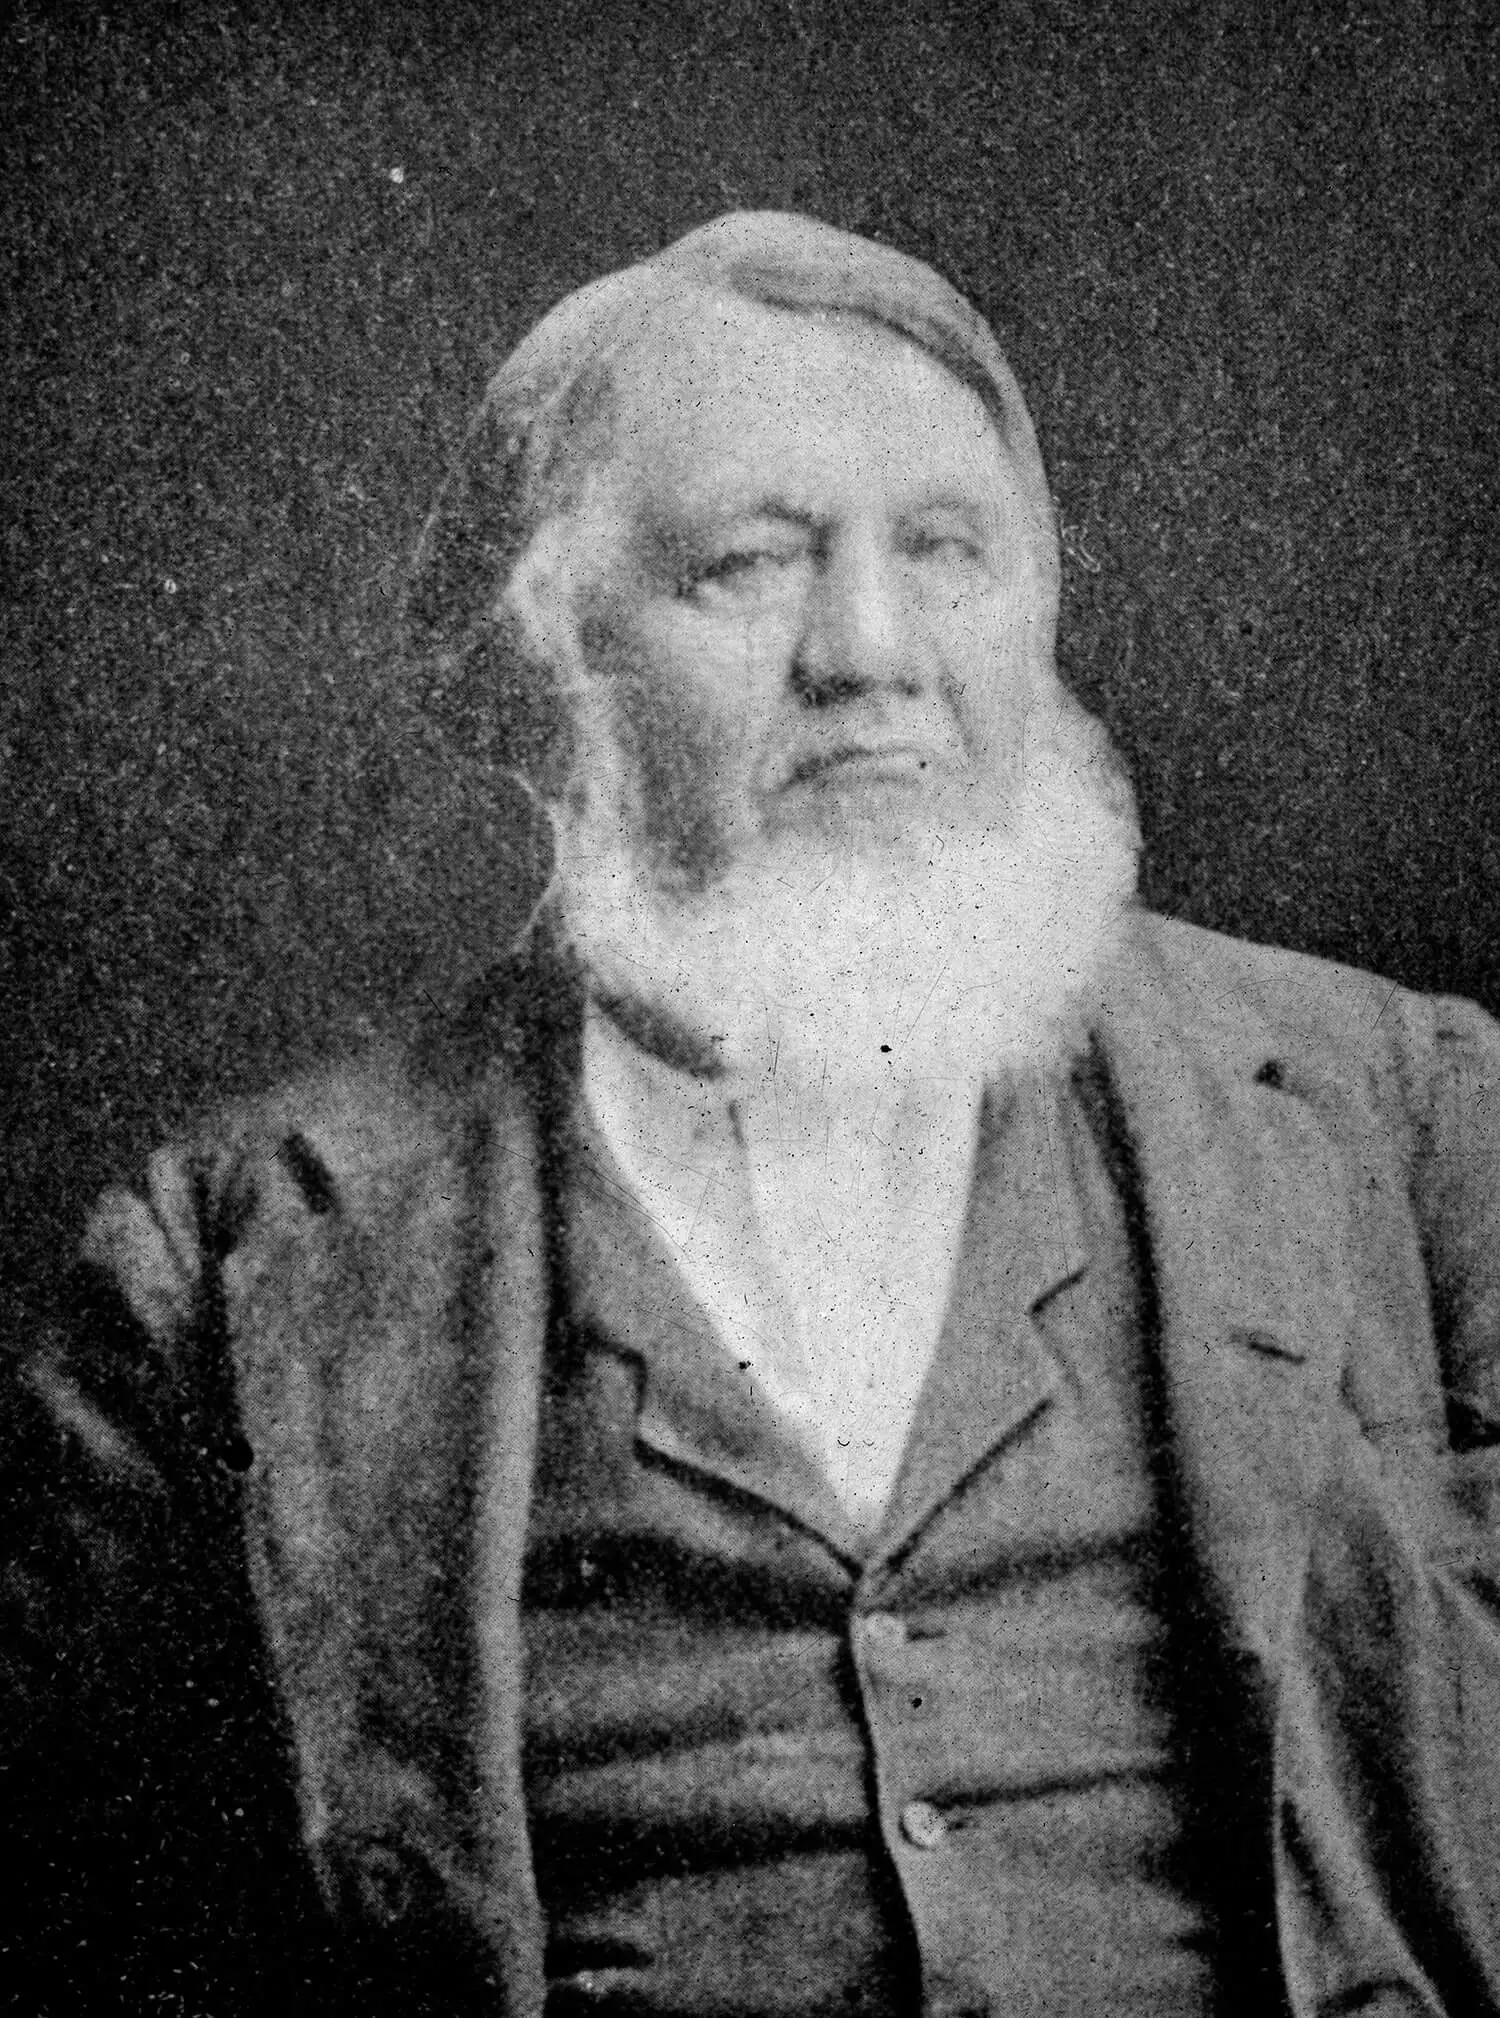 A grainy black and white photo of a white man with a white beard and white hair. He is wearing a white shirt, dark vest, and jacket.